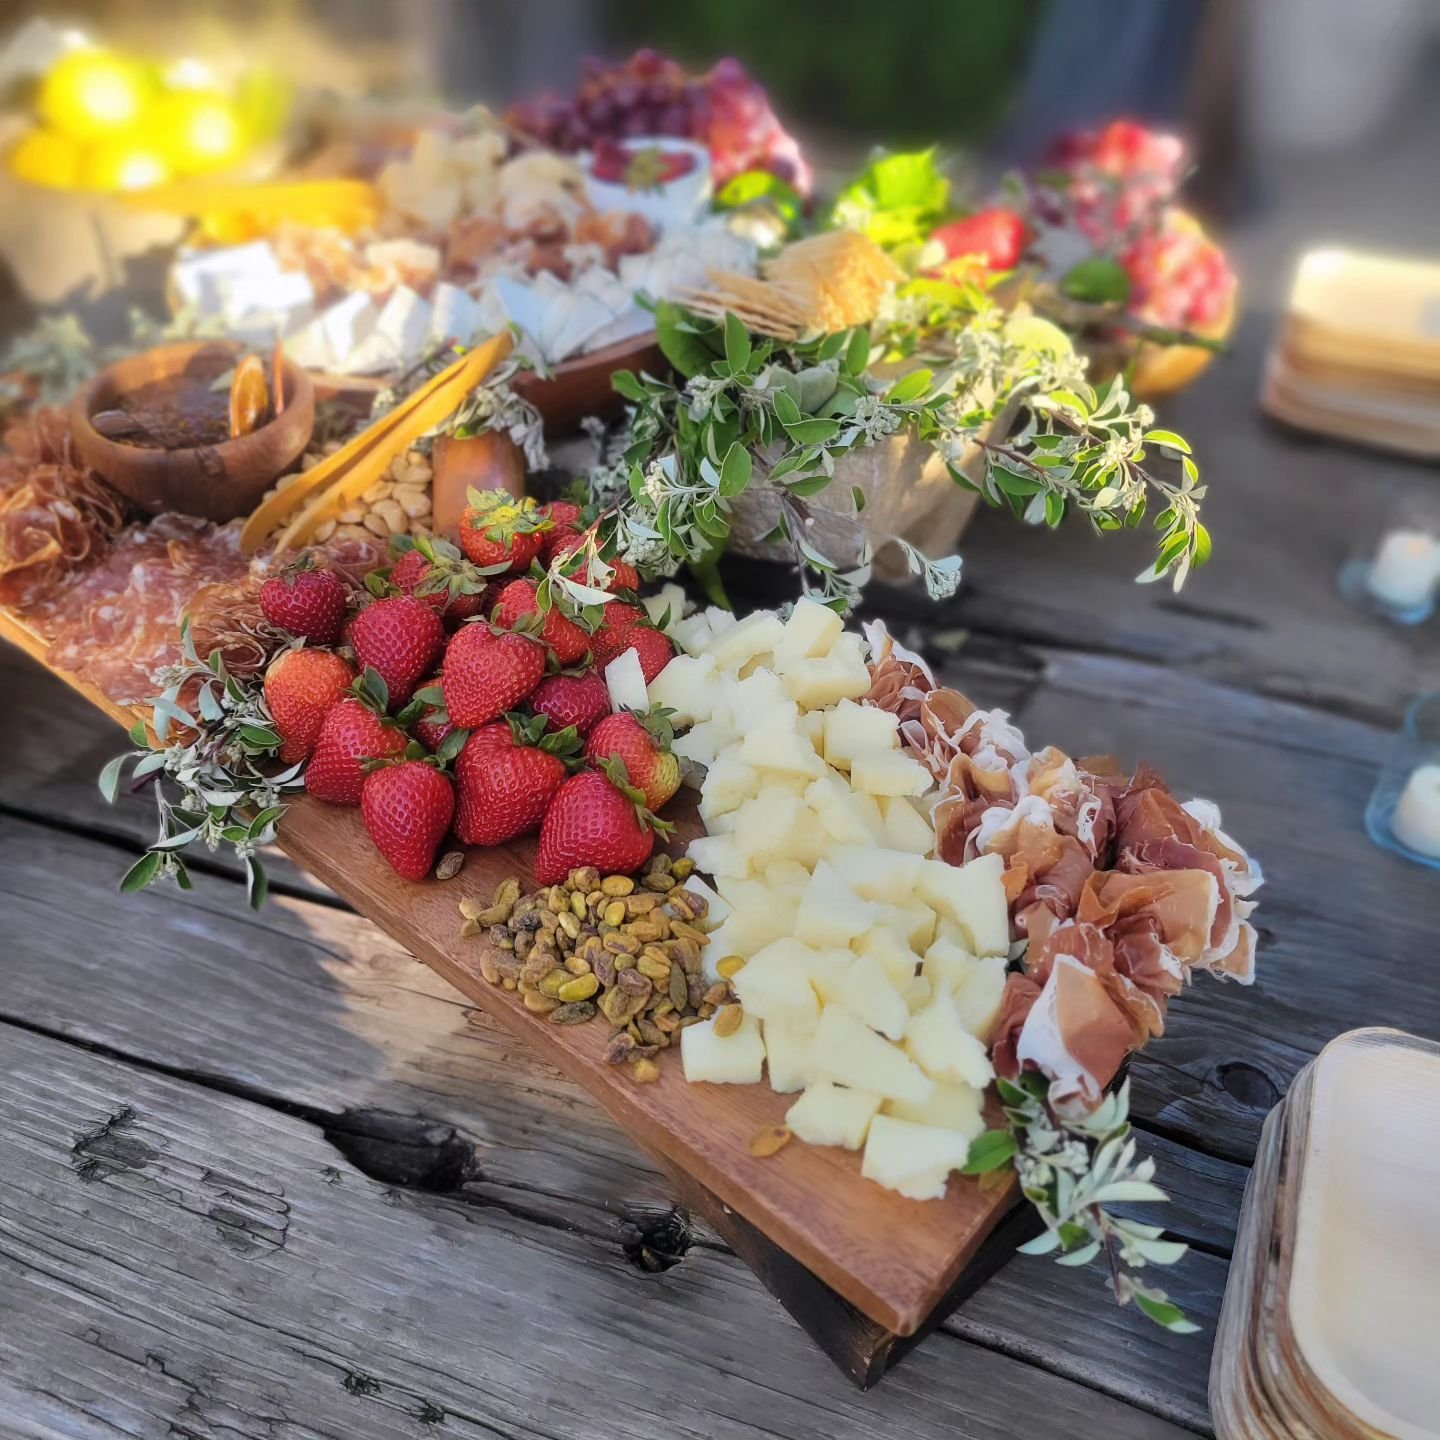 Dreamy.

#gatheringfeast #grazing #grazingtable #cheeseboard #collaboration #cheeseboard #charcuterieboard #charcuterie #catered #catering #womanownedbusiness #smallbusiness #foodstyling #foodstagram #cheese #rhyountvillerestaurant #rhwinevault